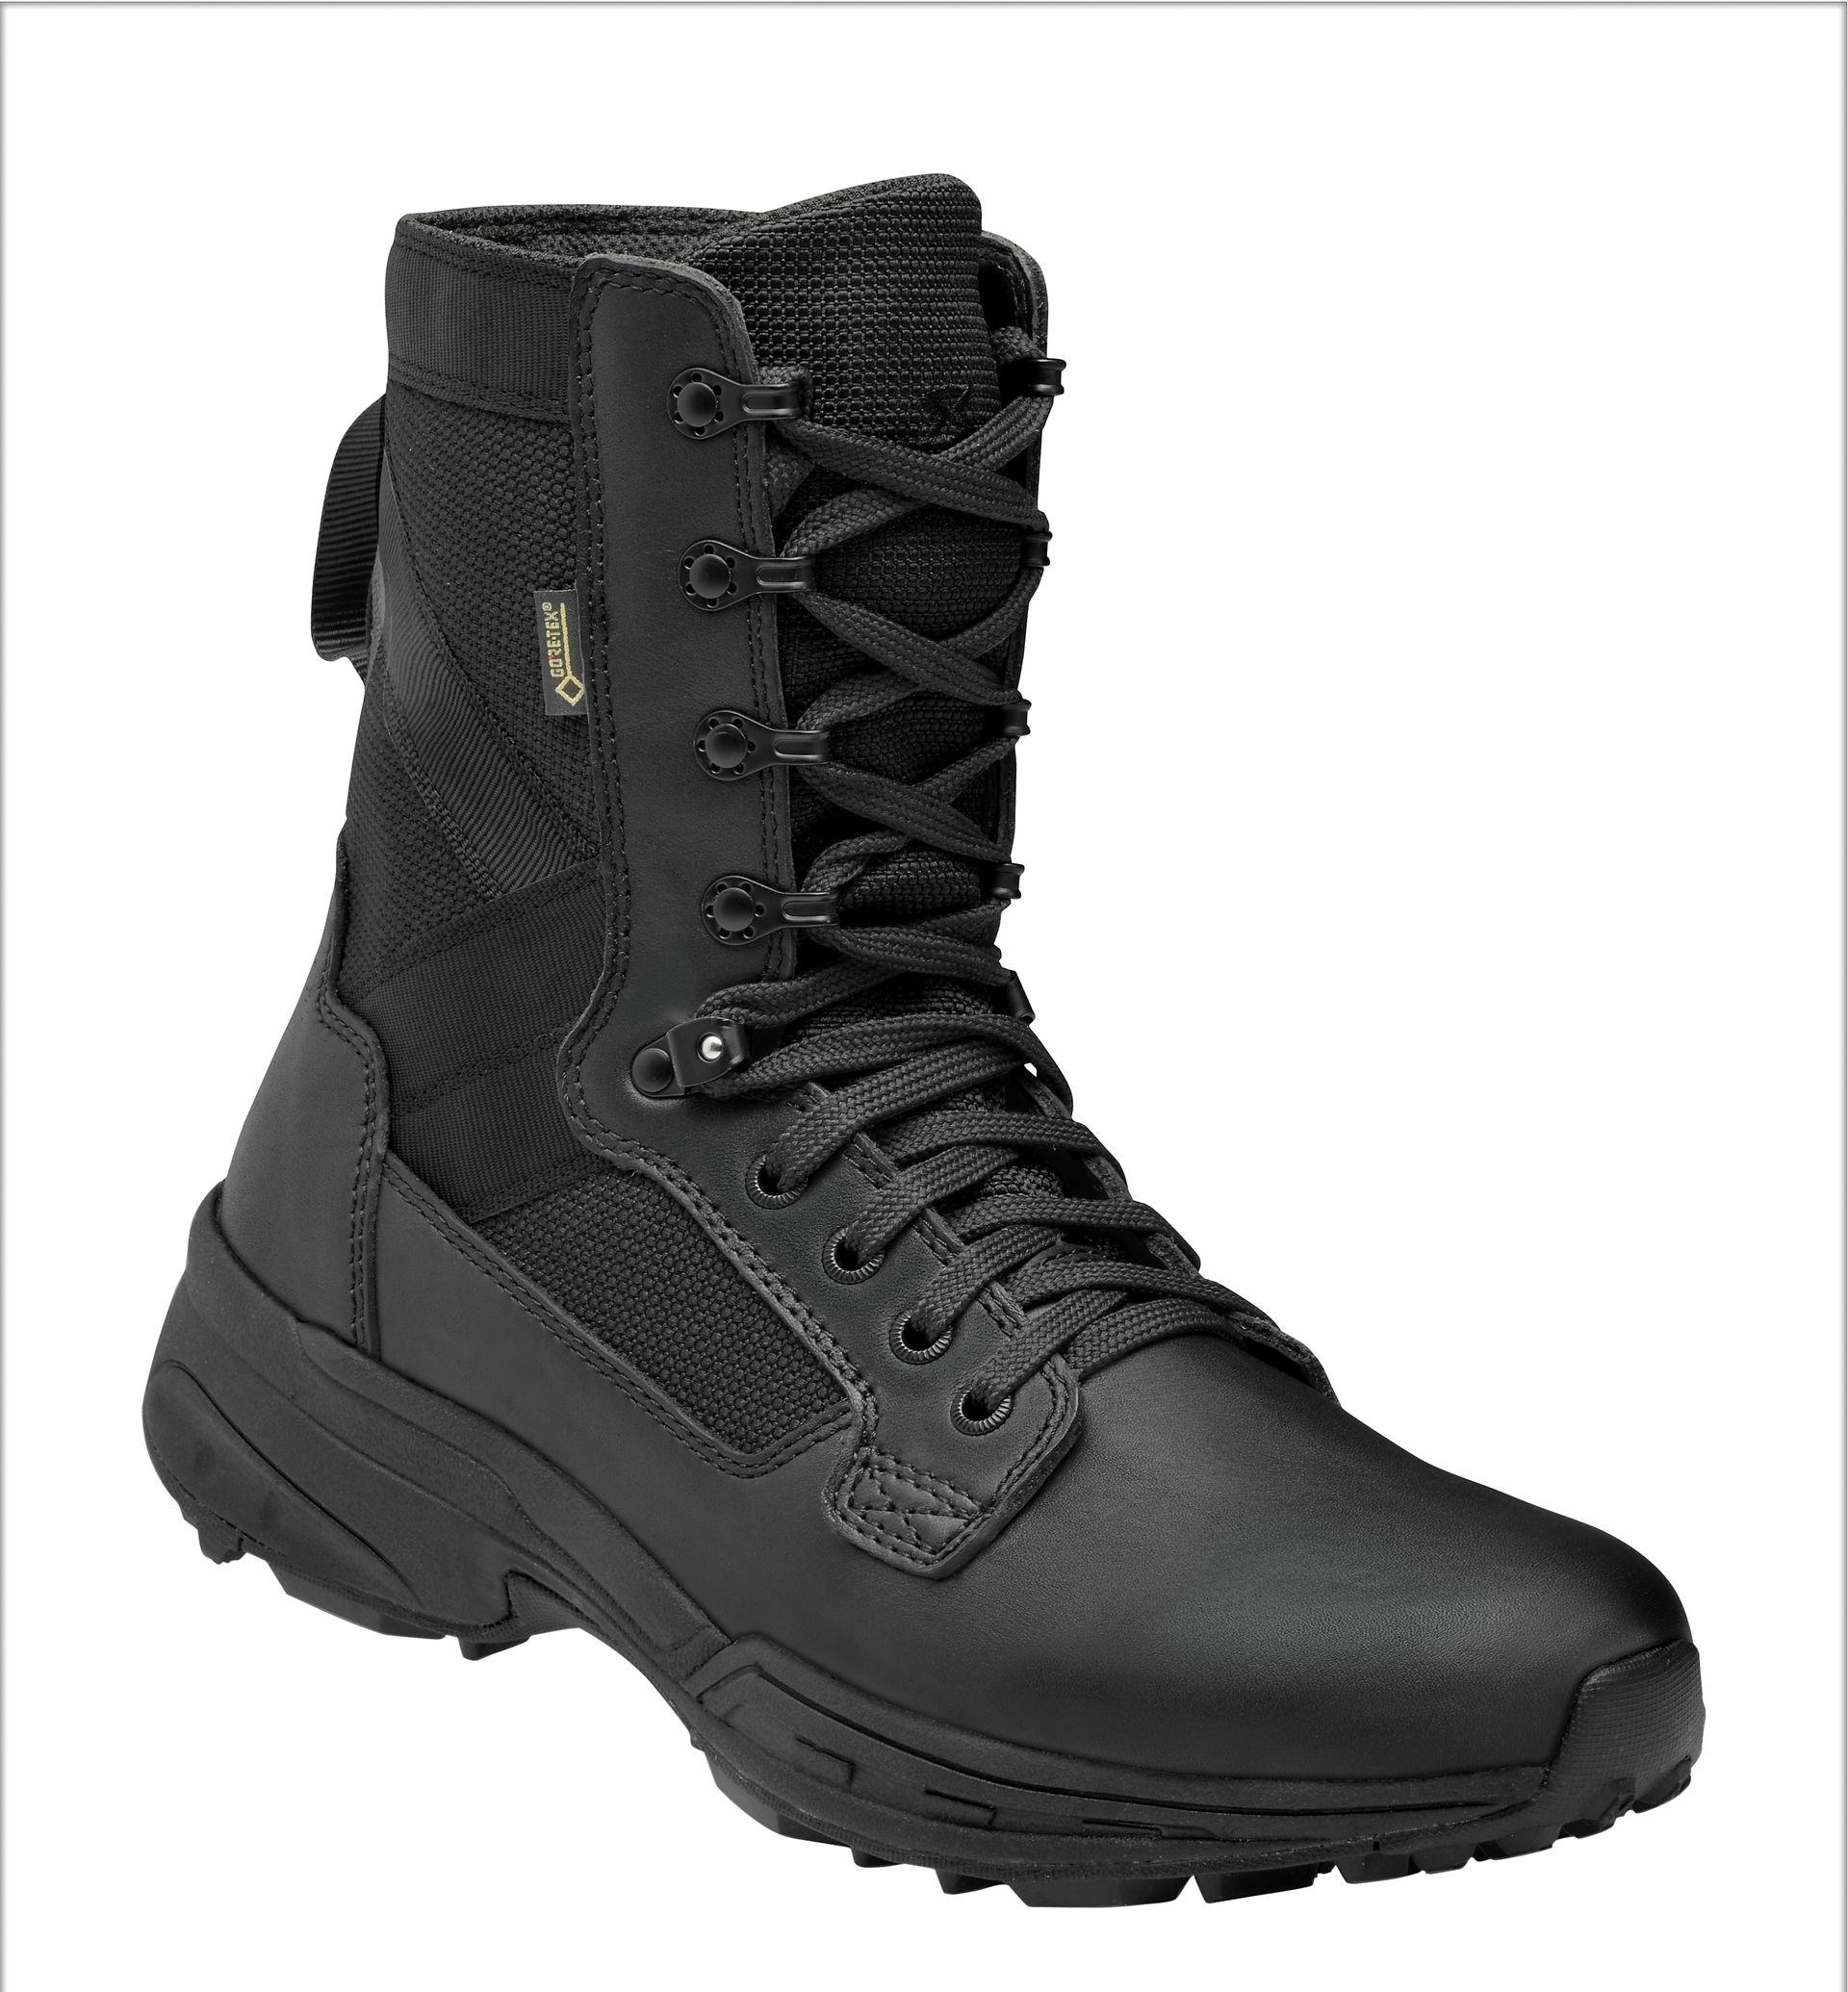 T8 Atlas Boot Collection From: Garmont 